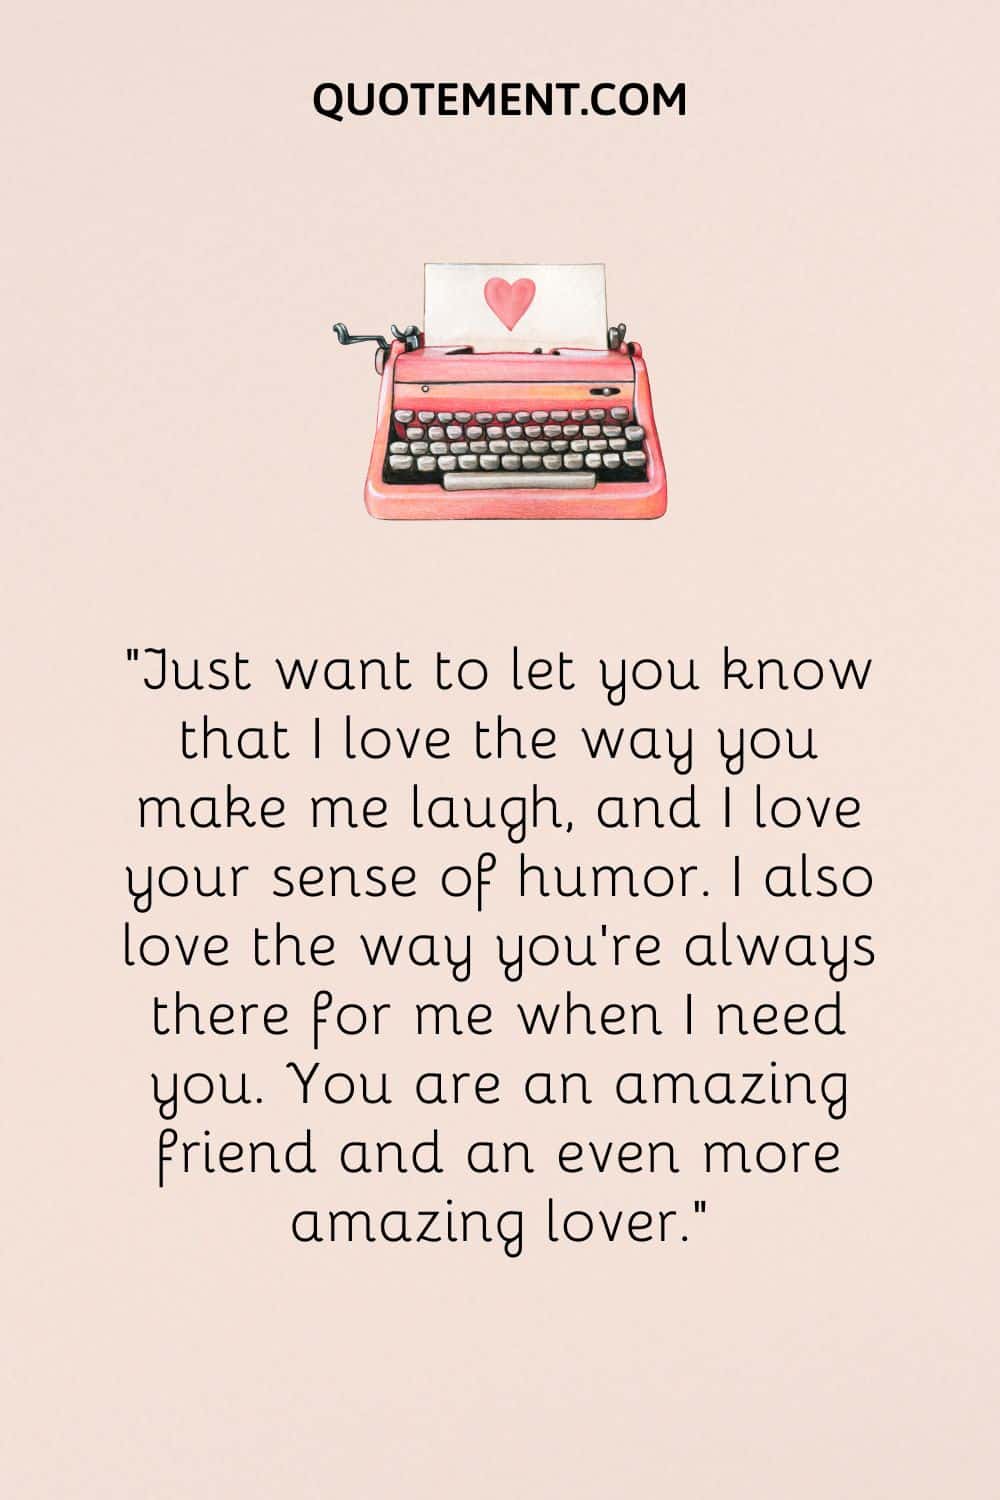 Just want to let you know that I love the way you make me laugh, and I love your sense of humor.